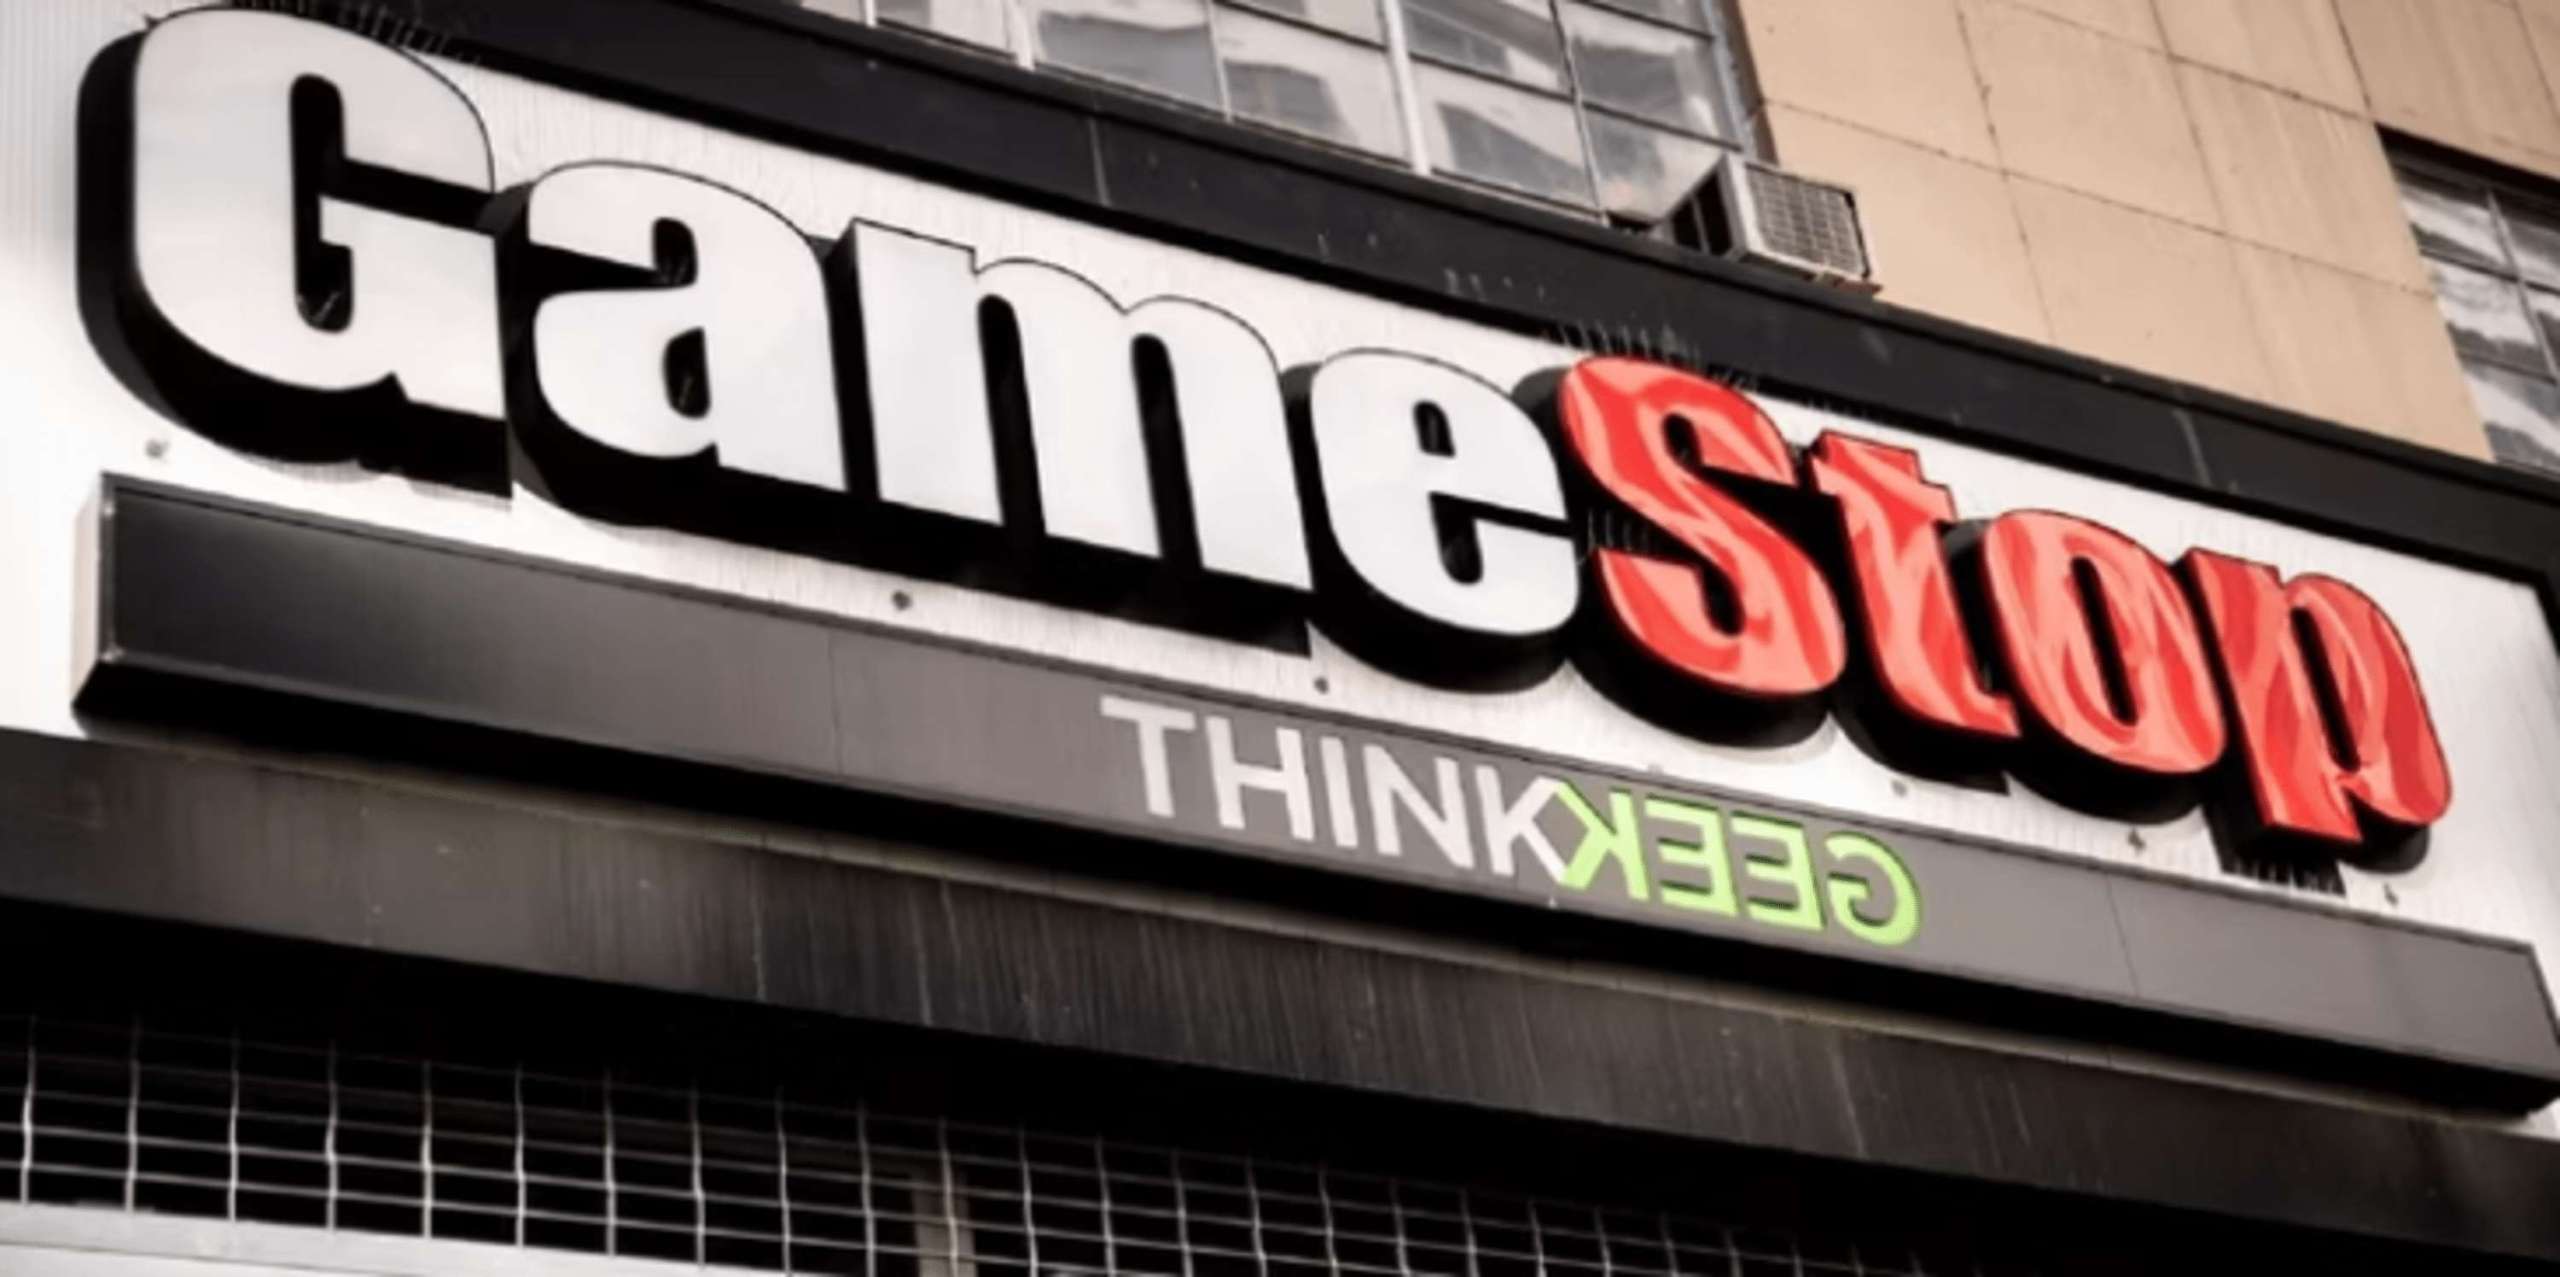 Sony Plans To Film The GameStop Saga And Release It In Theaters